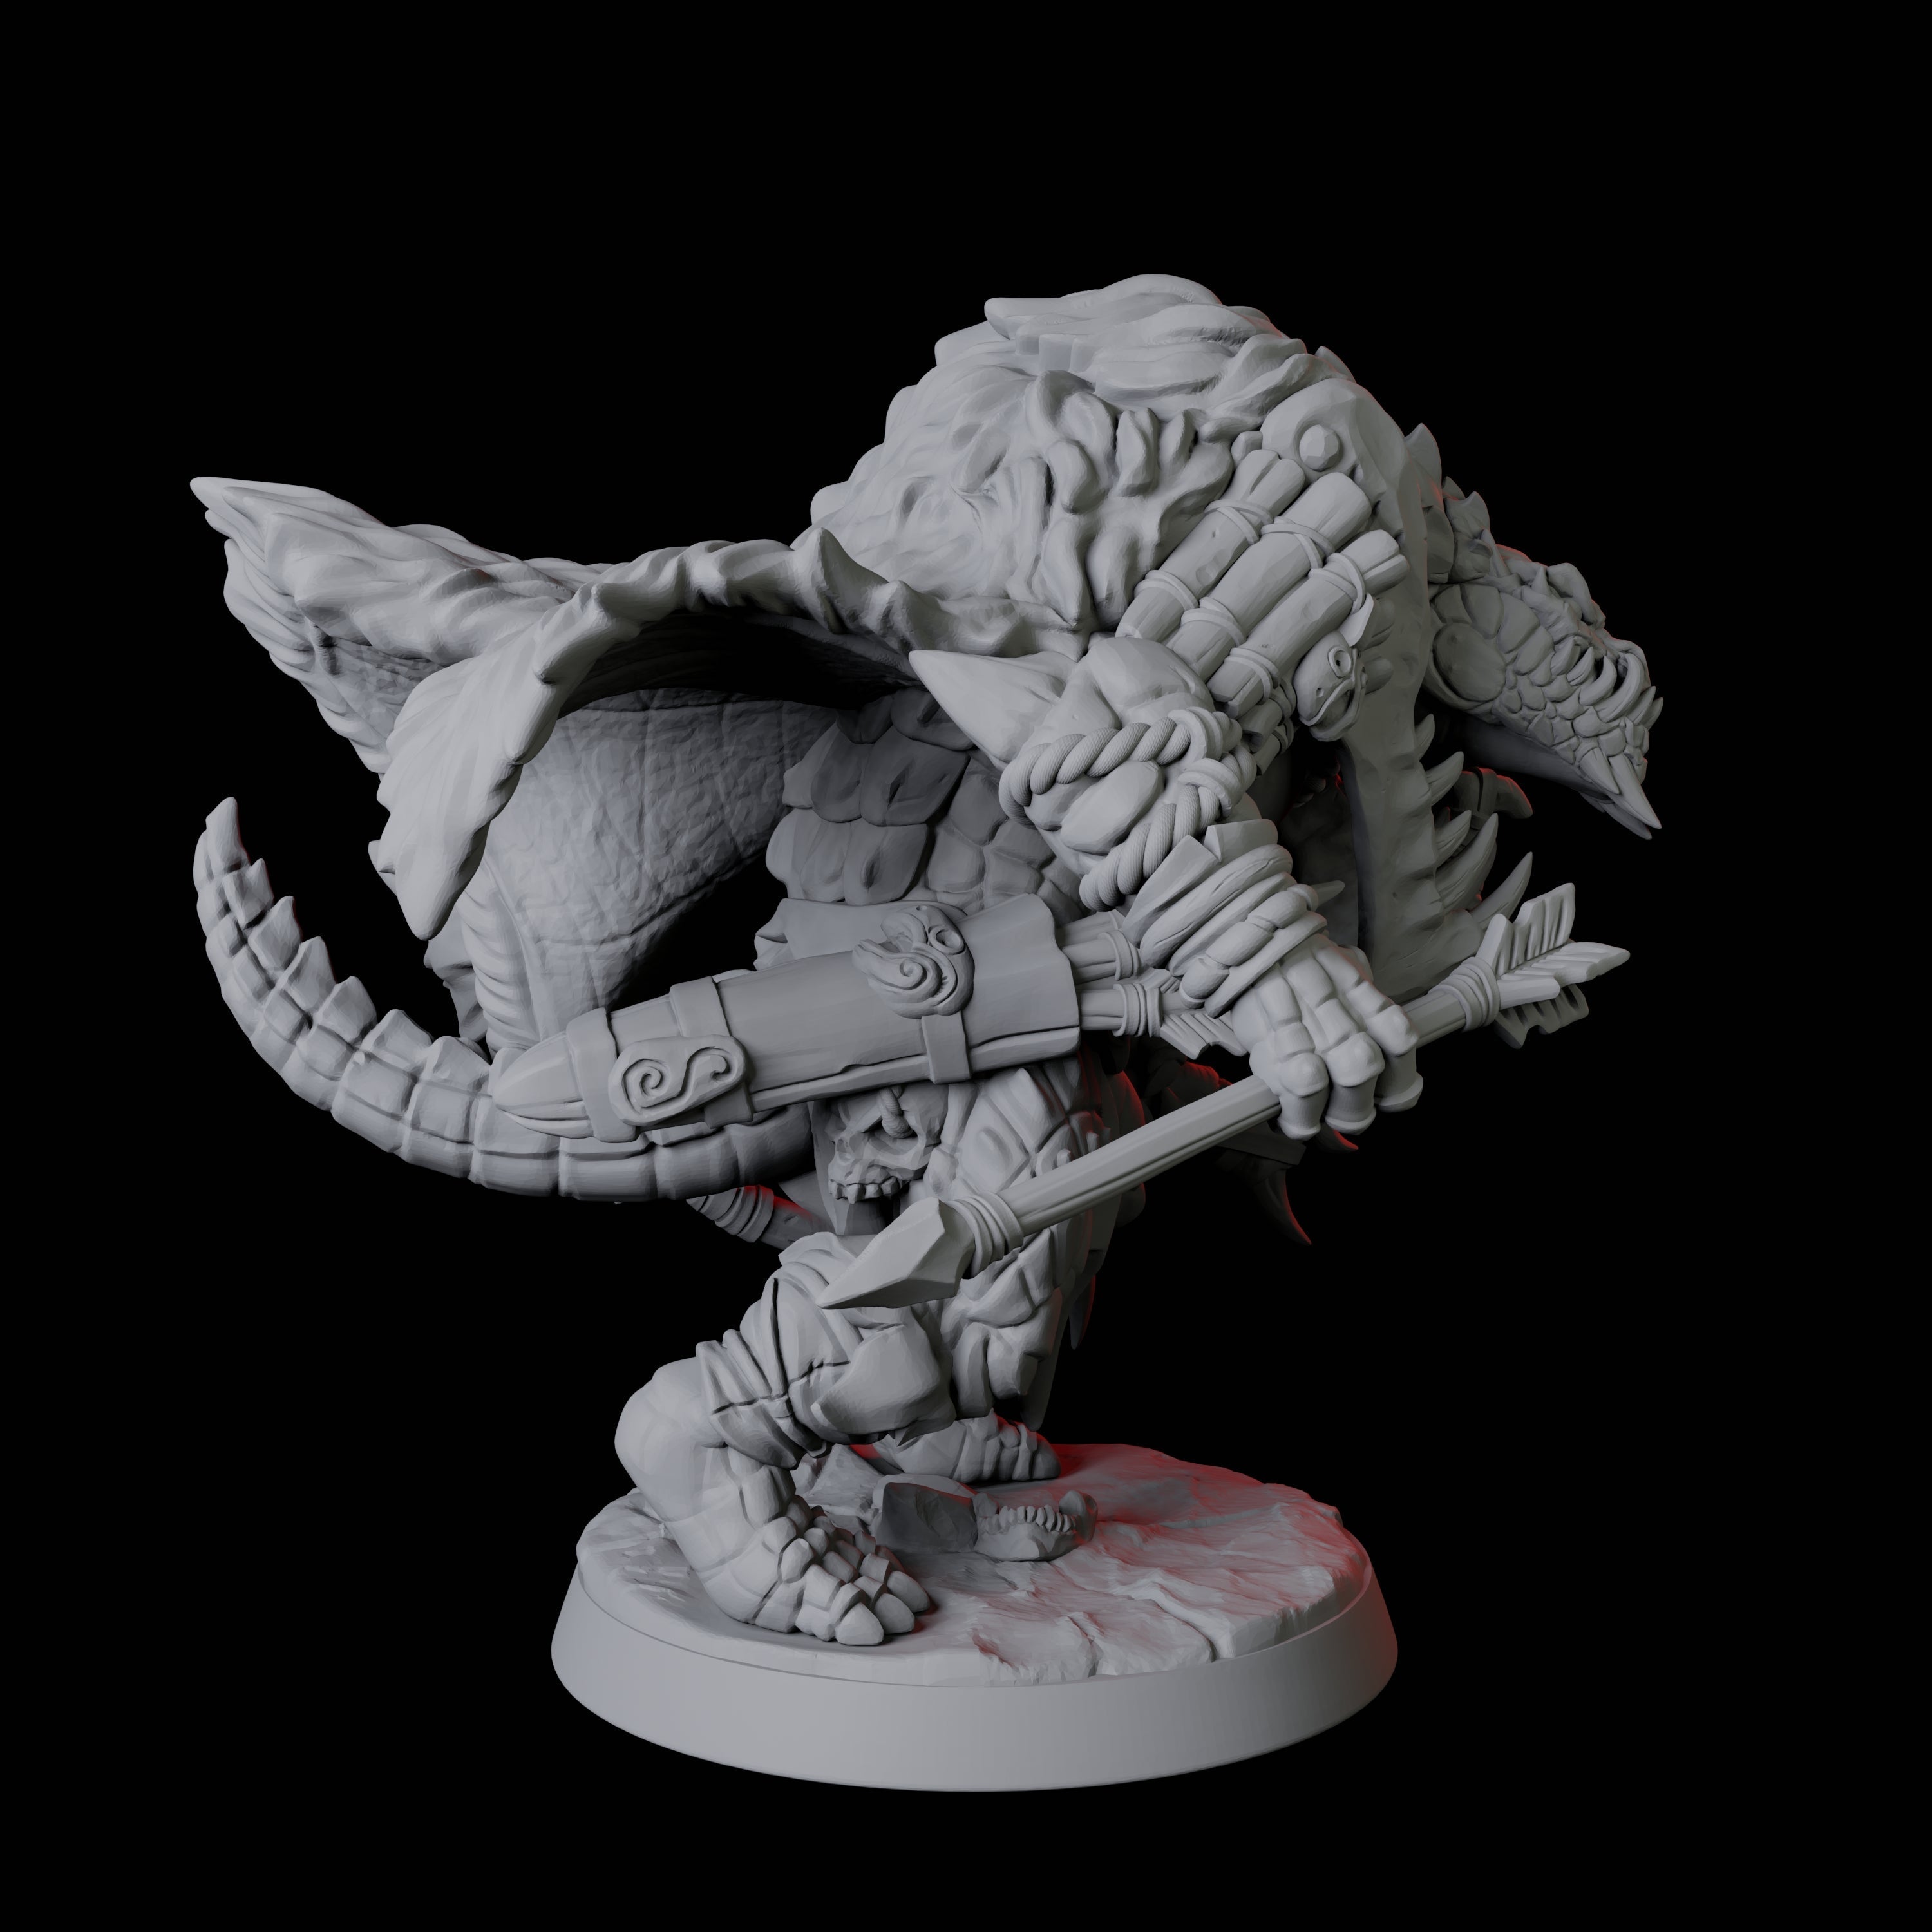 Powerful Frost Lizardfolk C Miniature for Dungeons and Dragons, Pathfinder or other TTRPGs